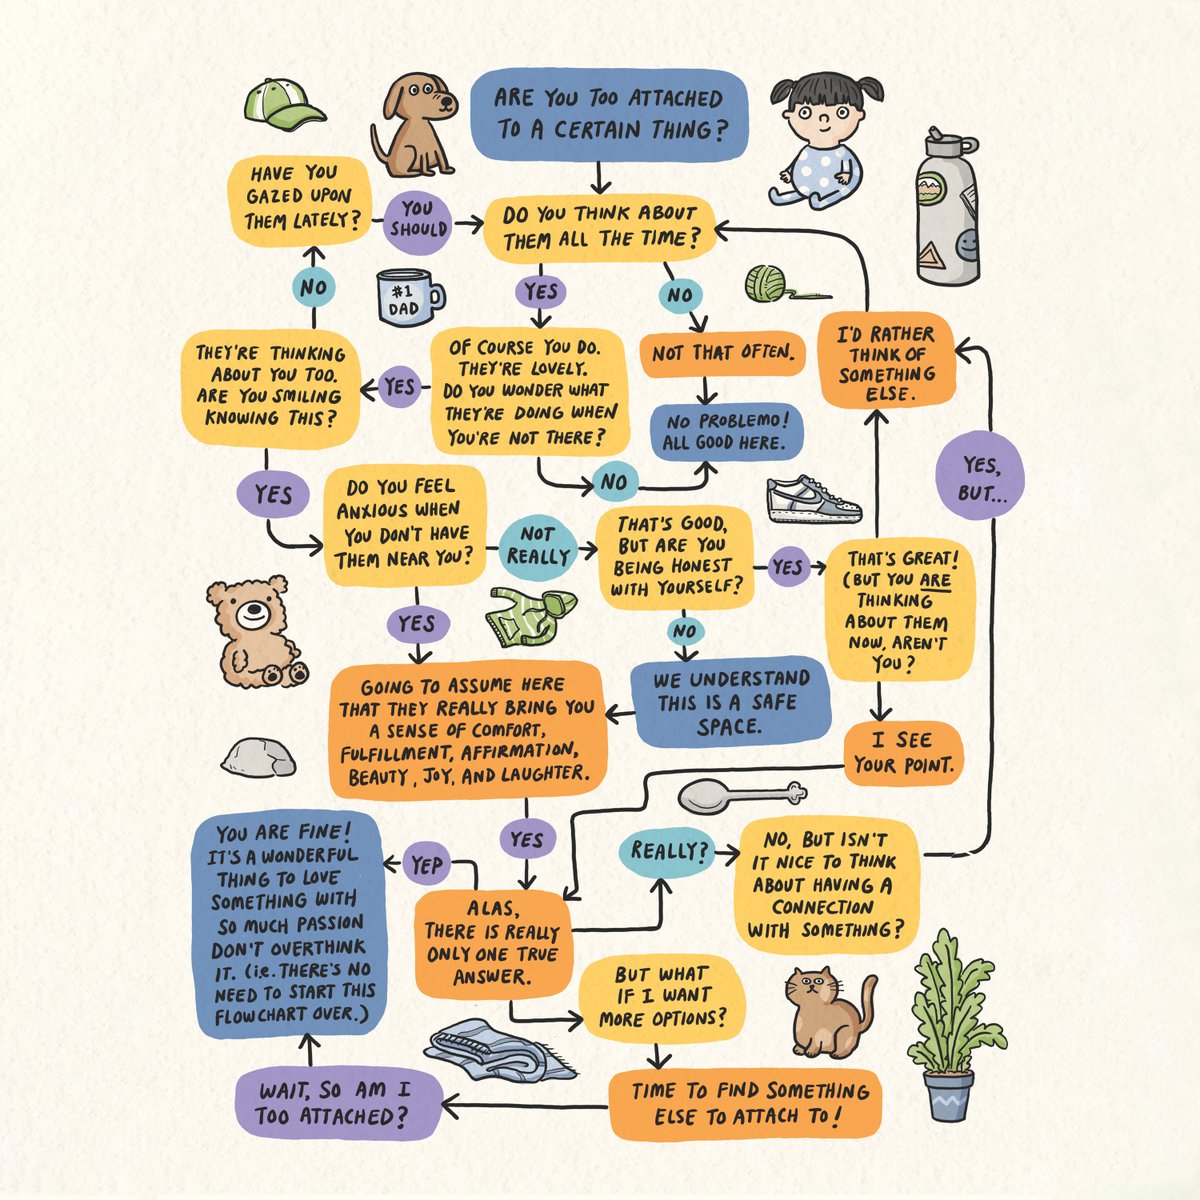 Are you too attached to a certain thing? Use this flow chart from illustrator and author Ruth Chan (@ohtruth) to find out! Explore more from the #Reframe issue of #SpiralMagazine now: rubinmuseum.org/spiral-magazin…